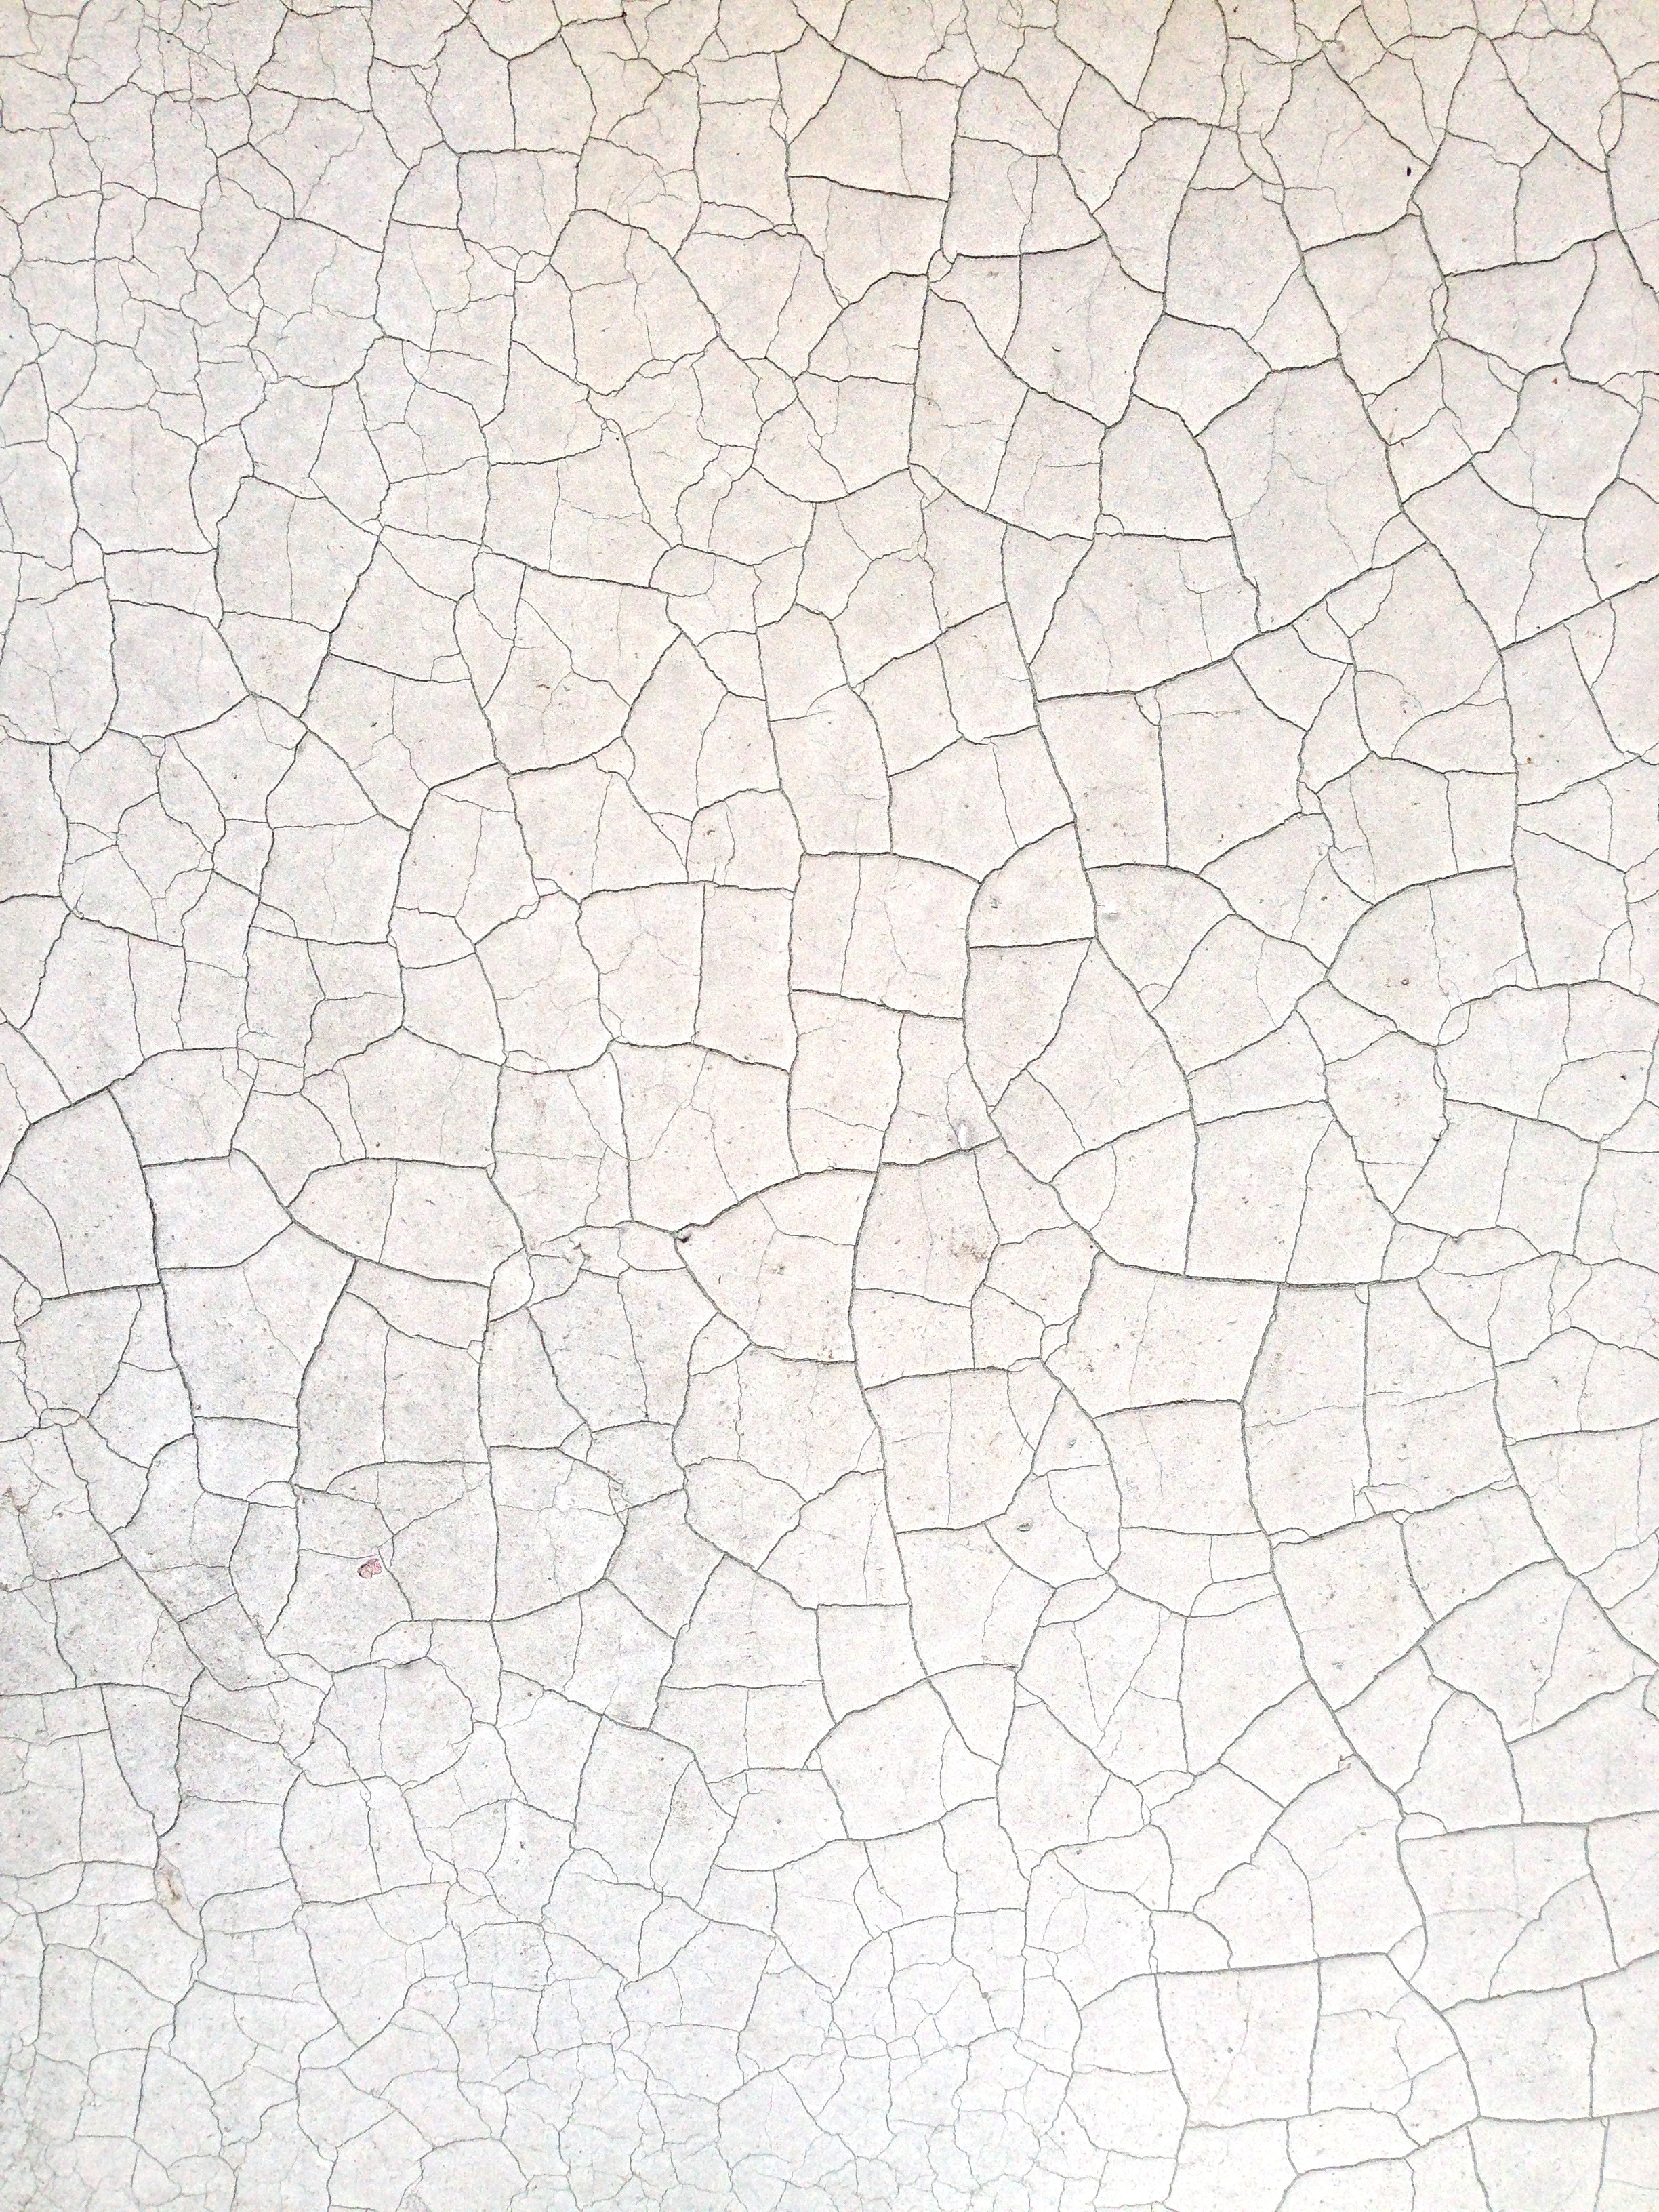 white, texture, textures, surface, dry, cracks, crack, invoice, cracked, shaky